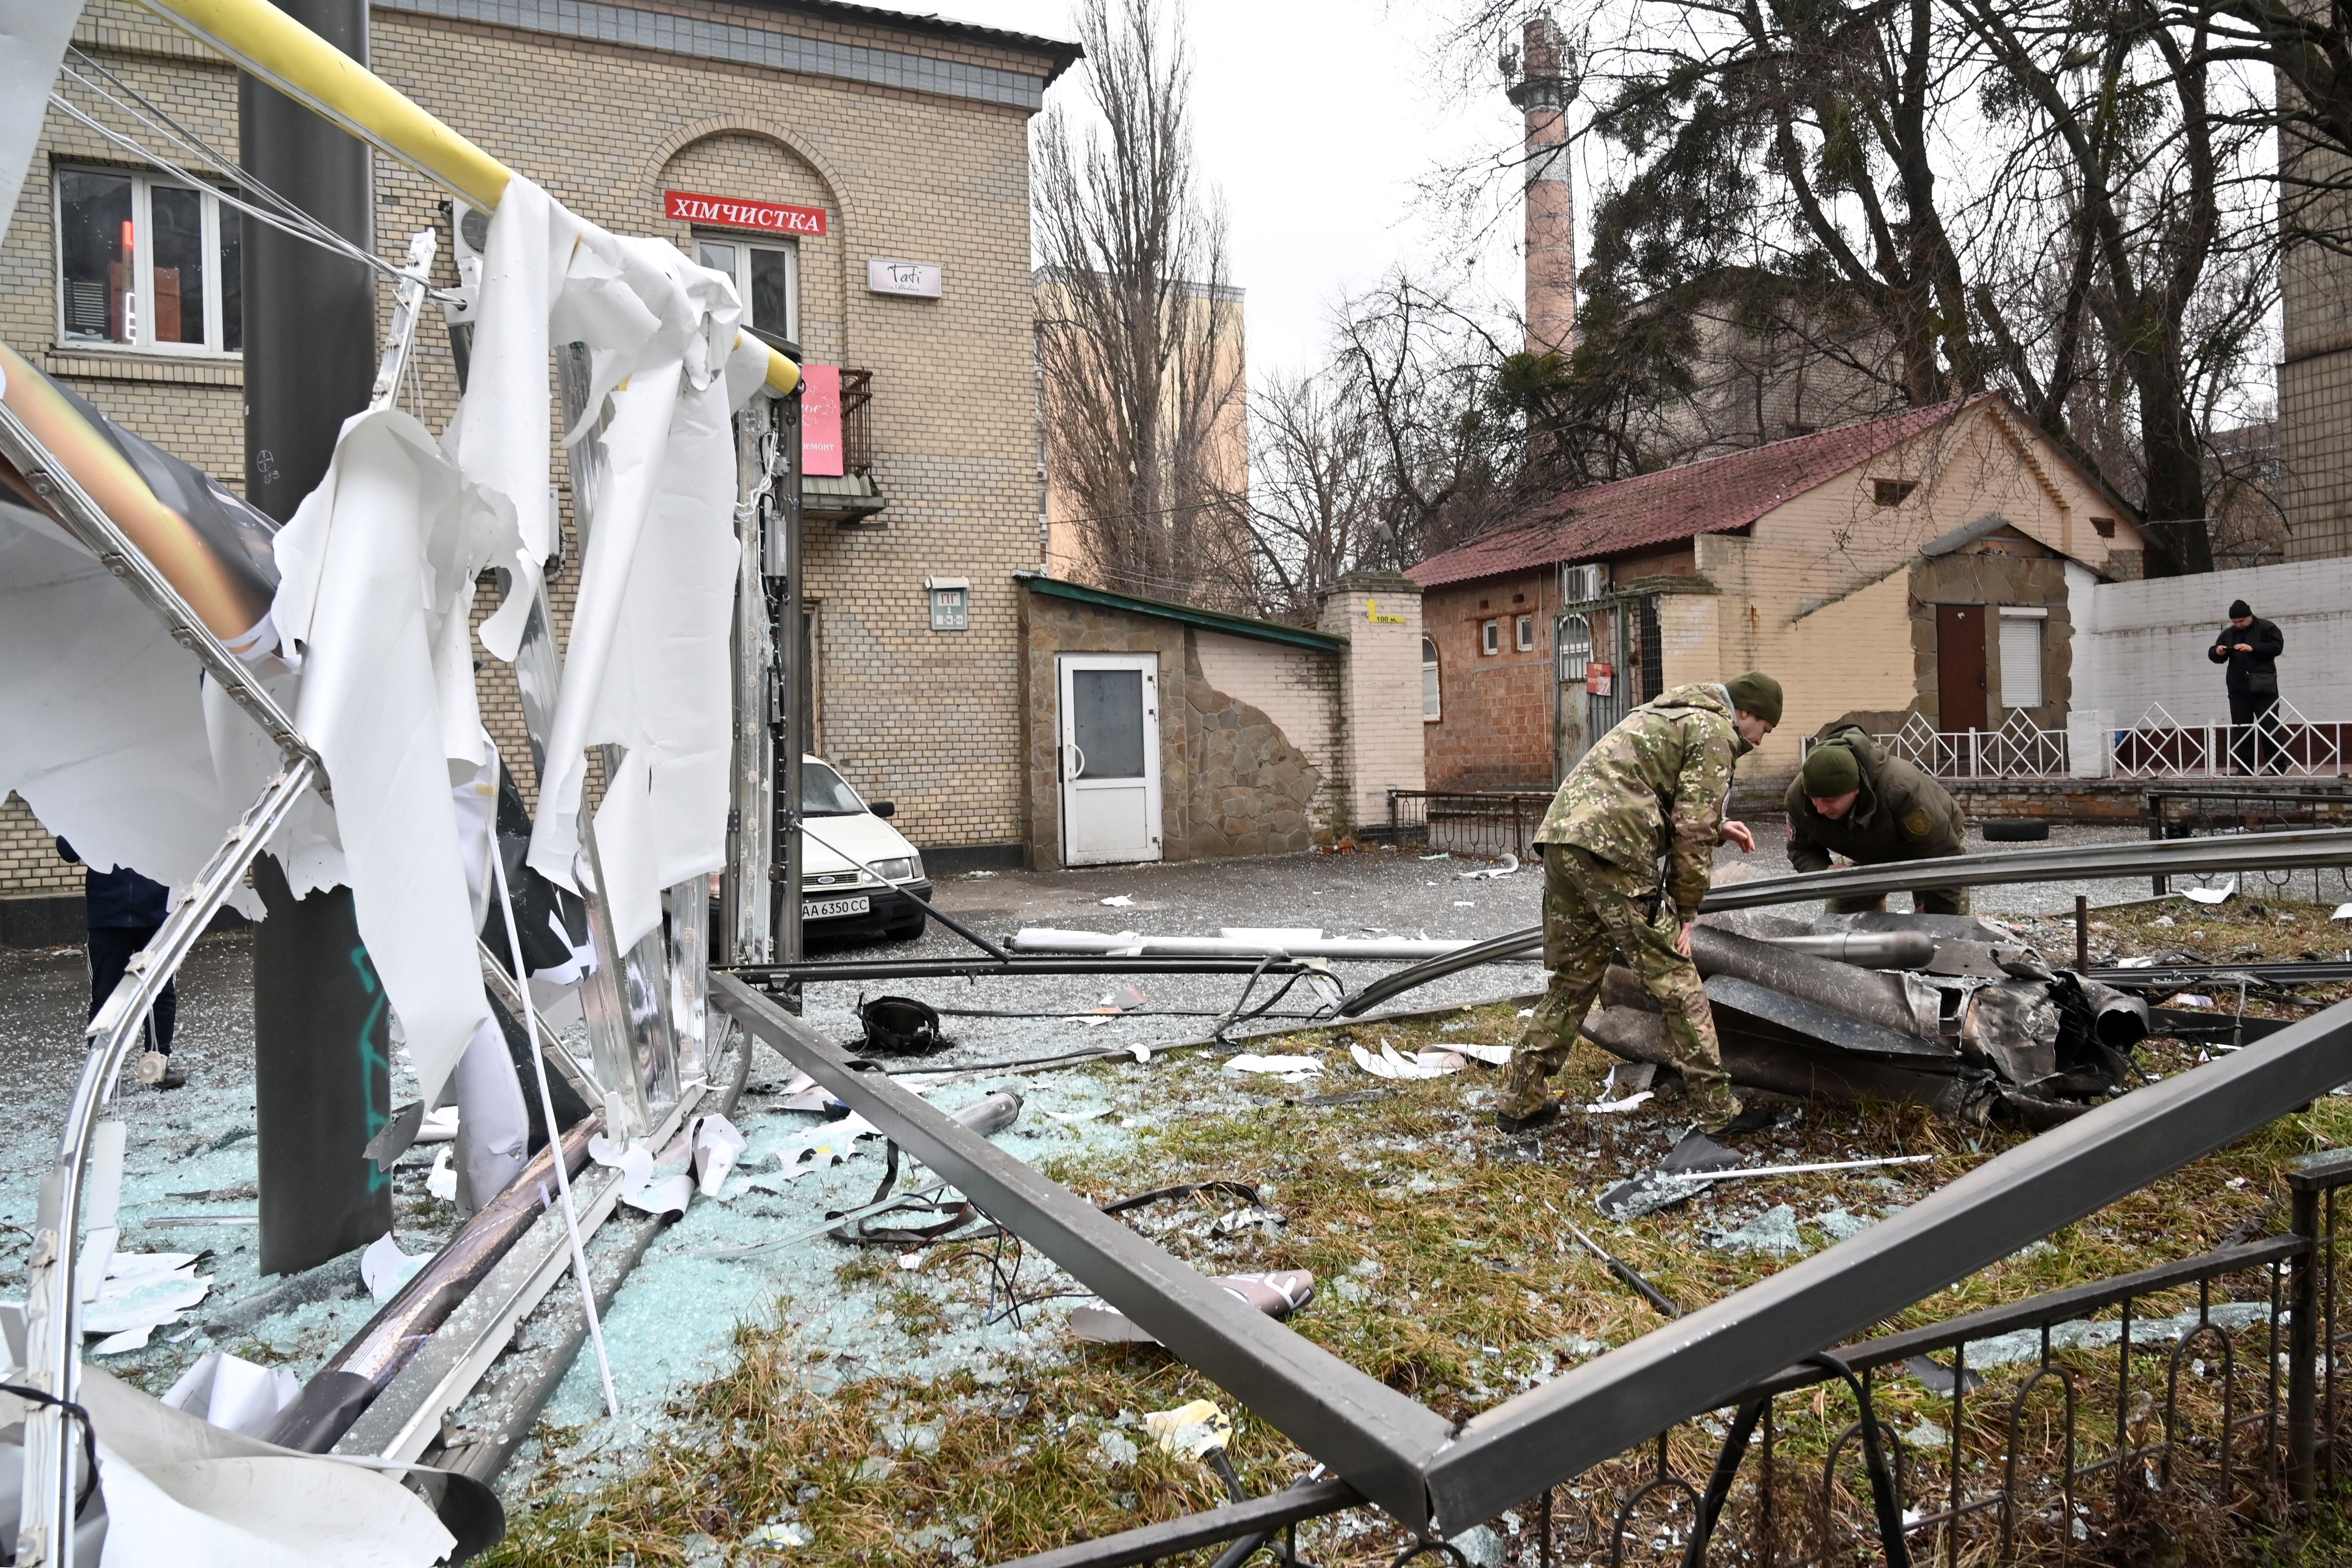 Police and security personnel inspect the remains of a shell in a street in Kyiv on February 24